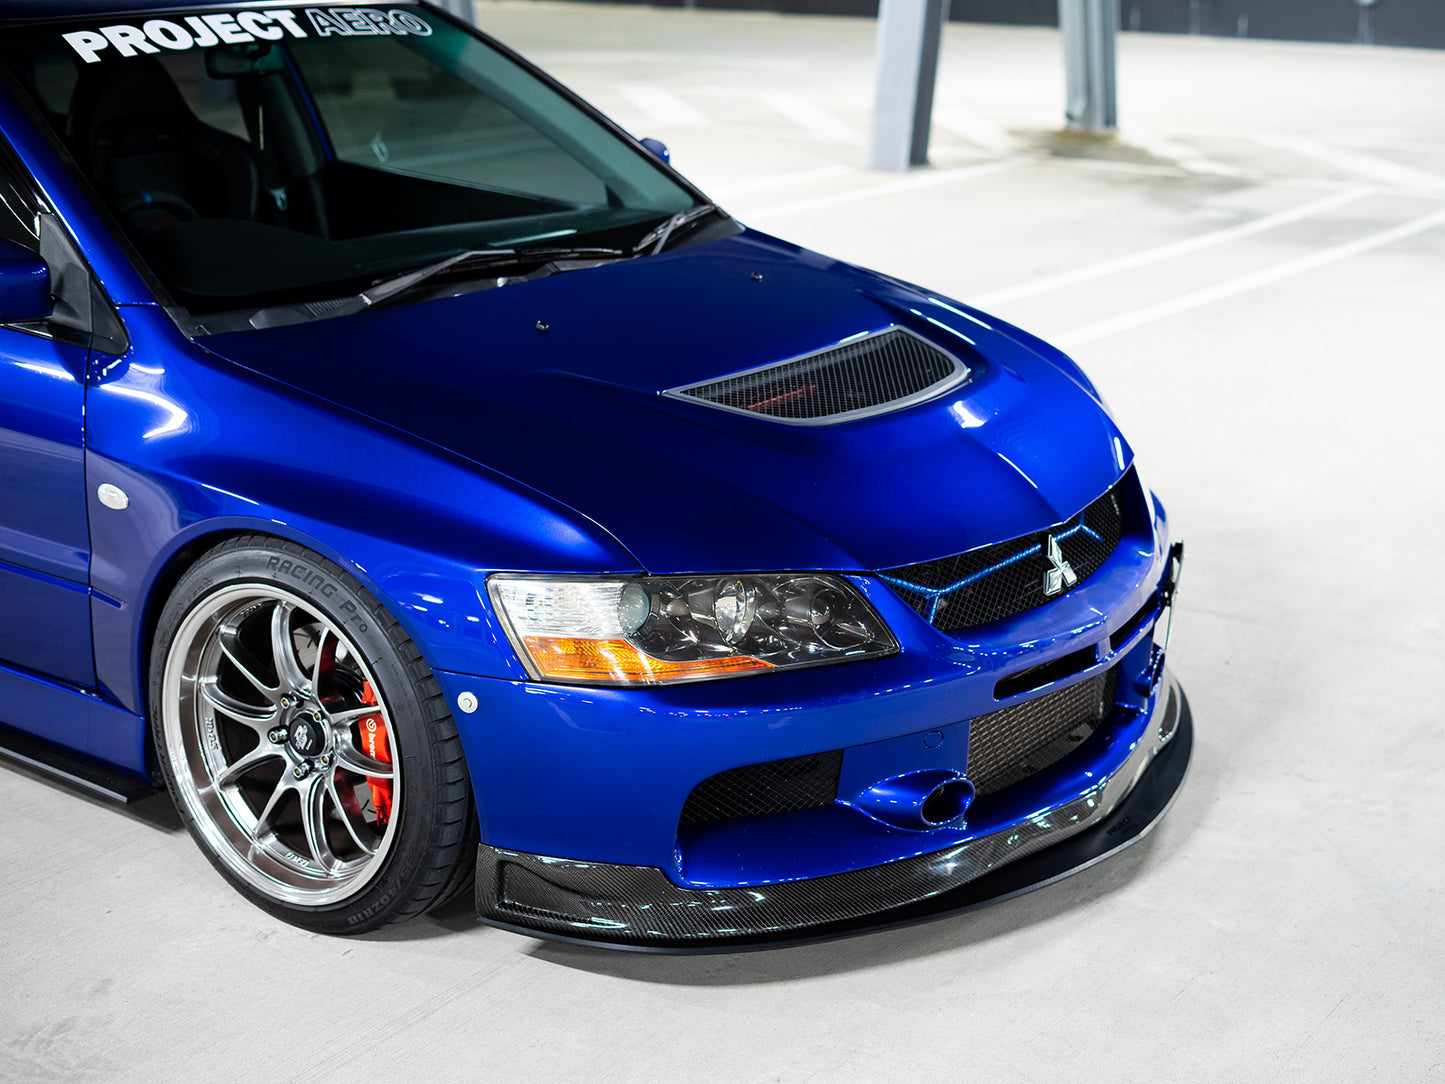 Project Aeros Evo 9 complete splitter lip kit is a perfect way to spice up your Evo 9, complimenting the OEM factory body kit